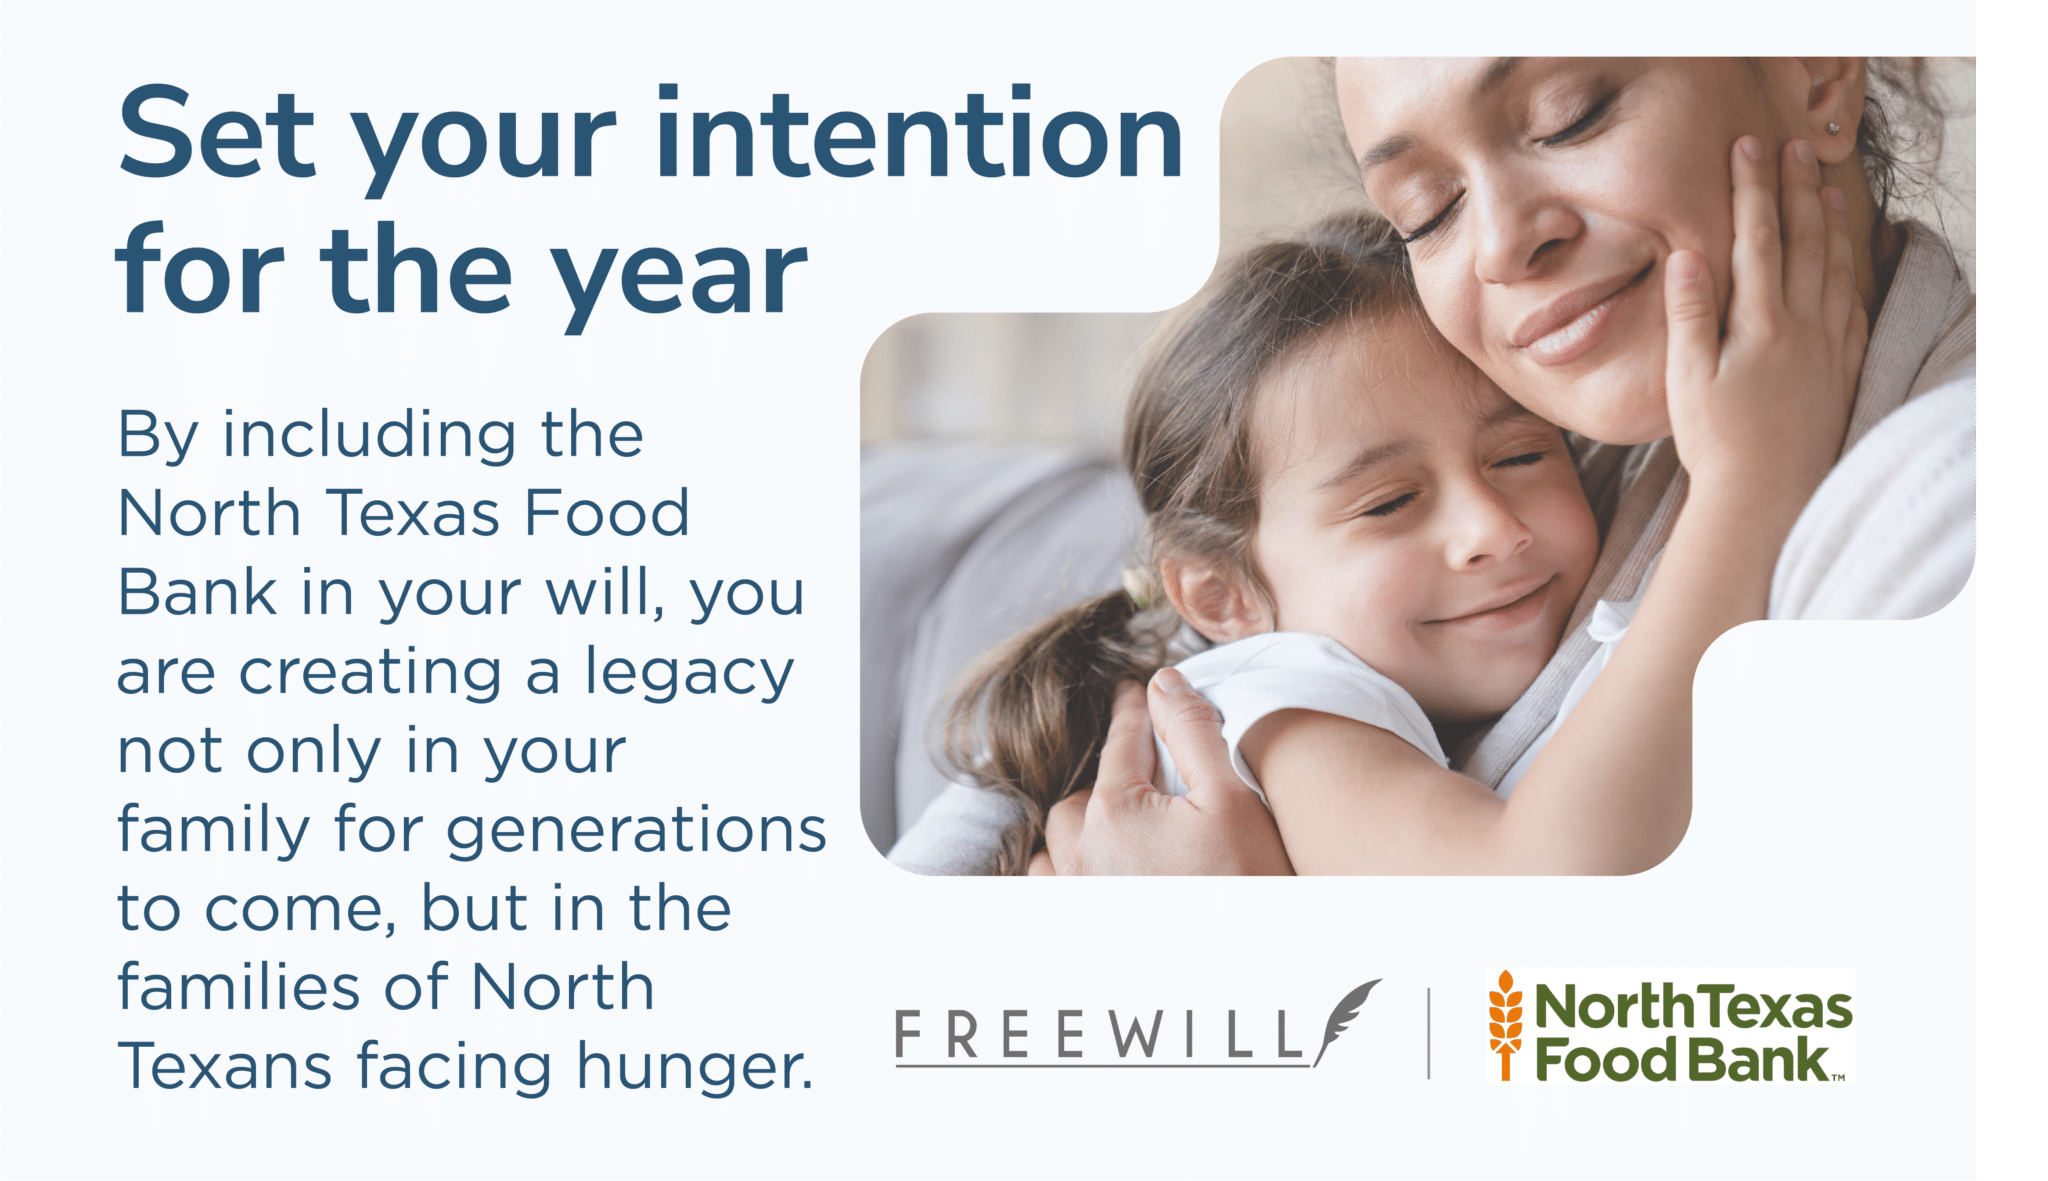 Set your intention for the year. Include NTFB in your will.